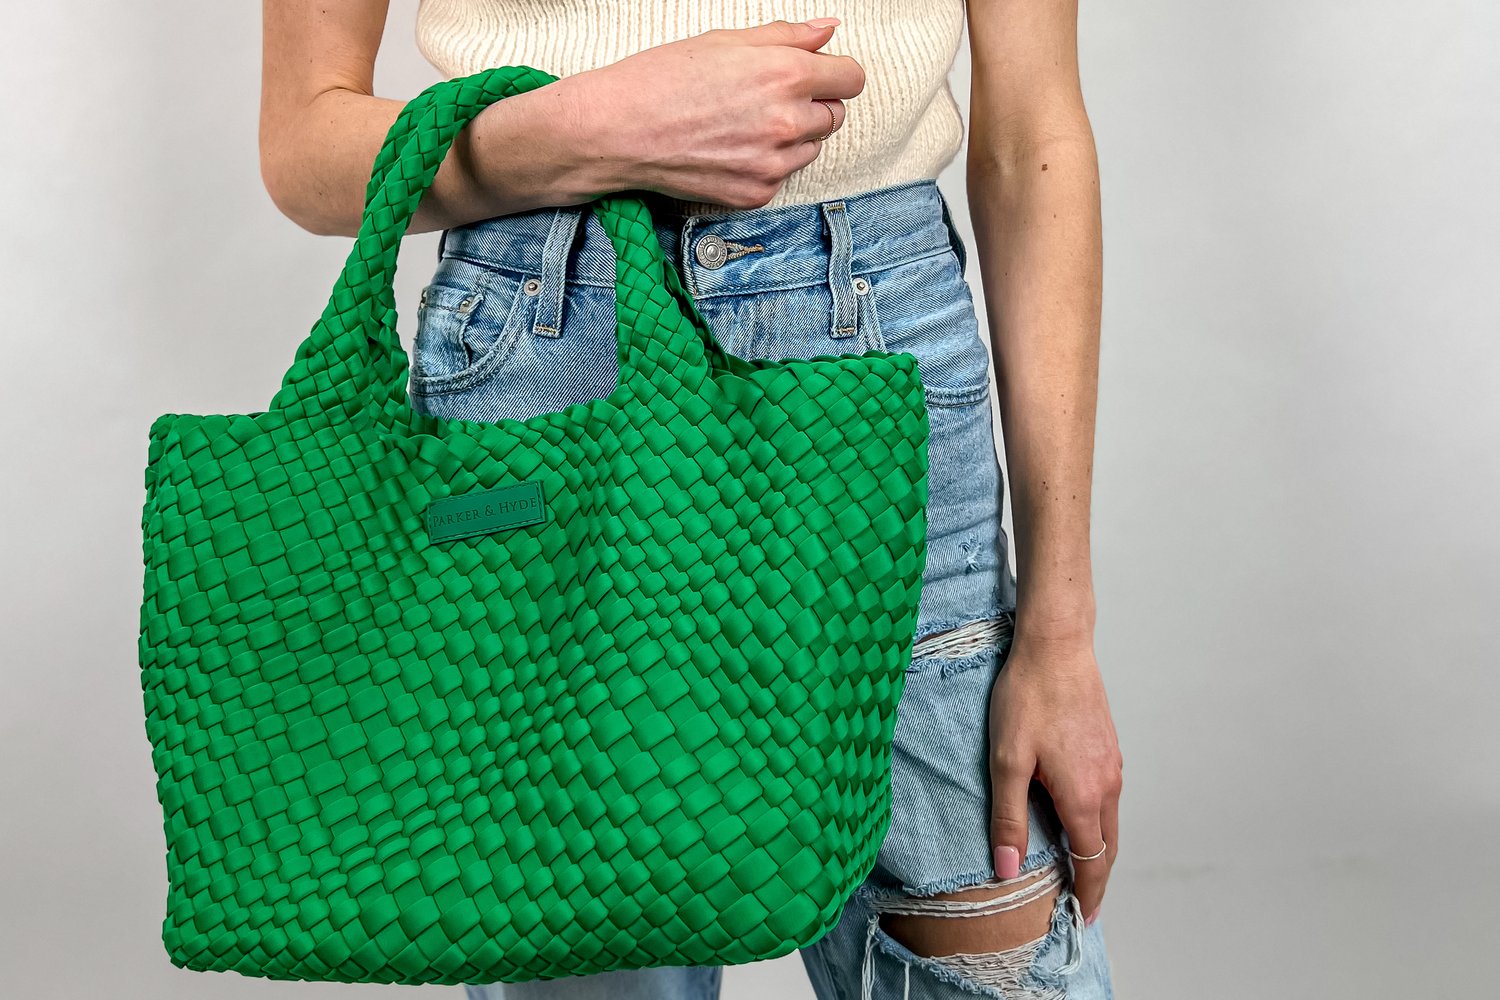 Kelly Green Classic Woven Tote — Parker & Hyde